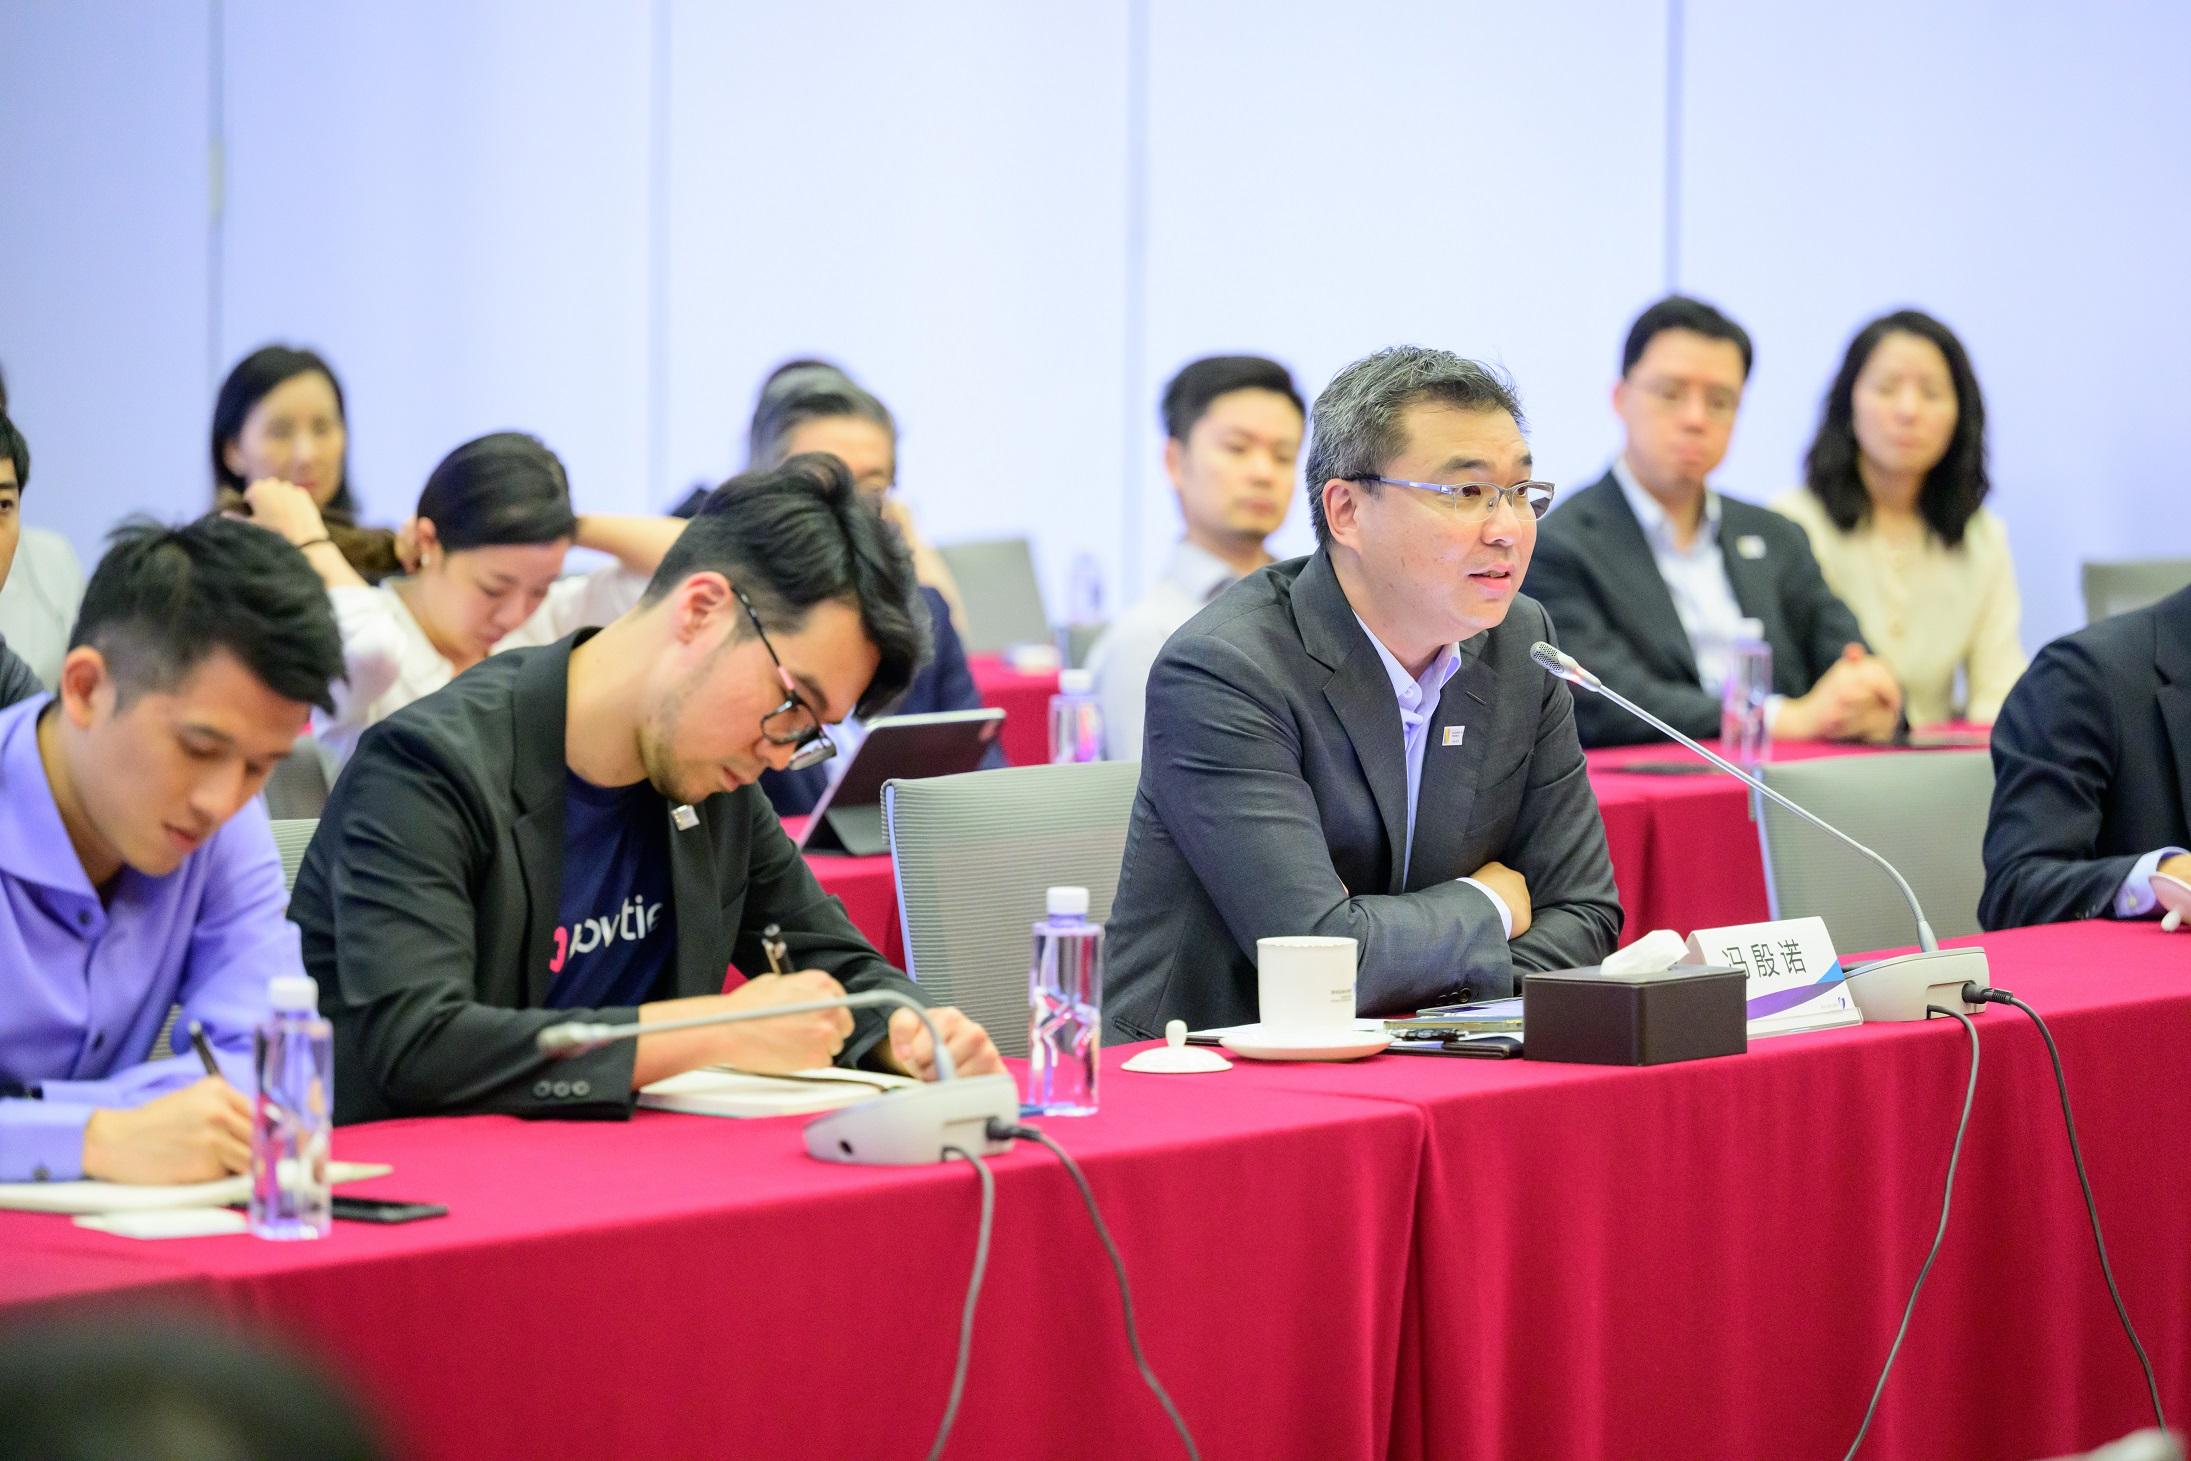 A delegation of participants of the Hong Kong Academy of Finance Financial Leaders Programme (FLP) completed the inaugural FLP field trip to Shenzhen from September 24 to 27. The FLP cohorts have fruitful exchanges with the receiving institutions.